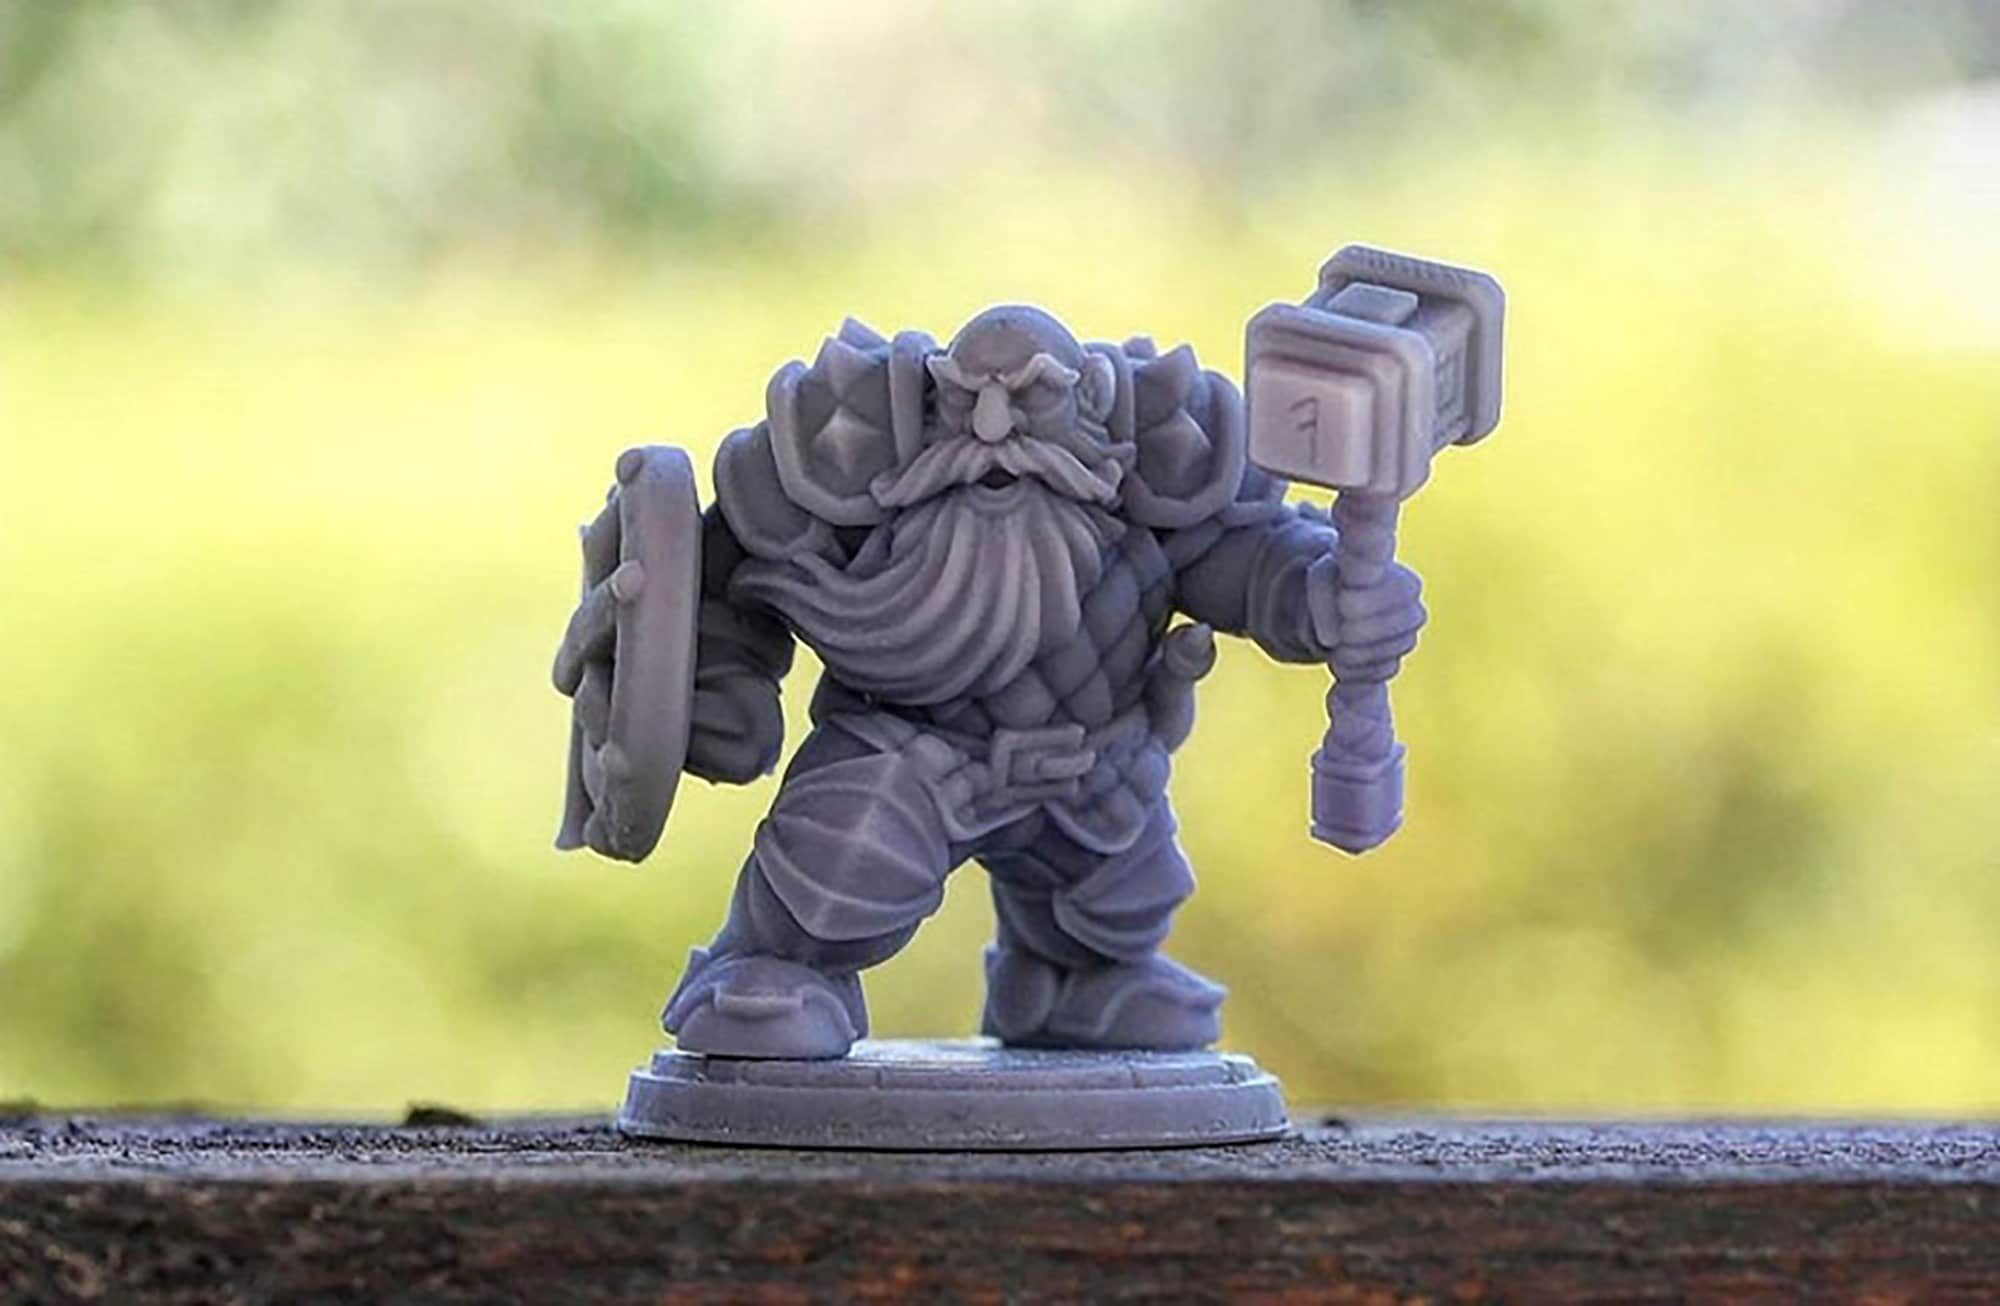 DWARF SOLDIERS "Hammer" (M) (3 Versions)-Role Playing Miniatures